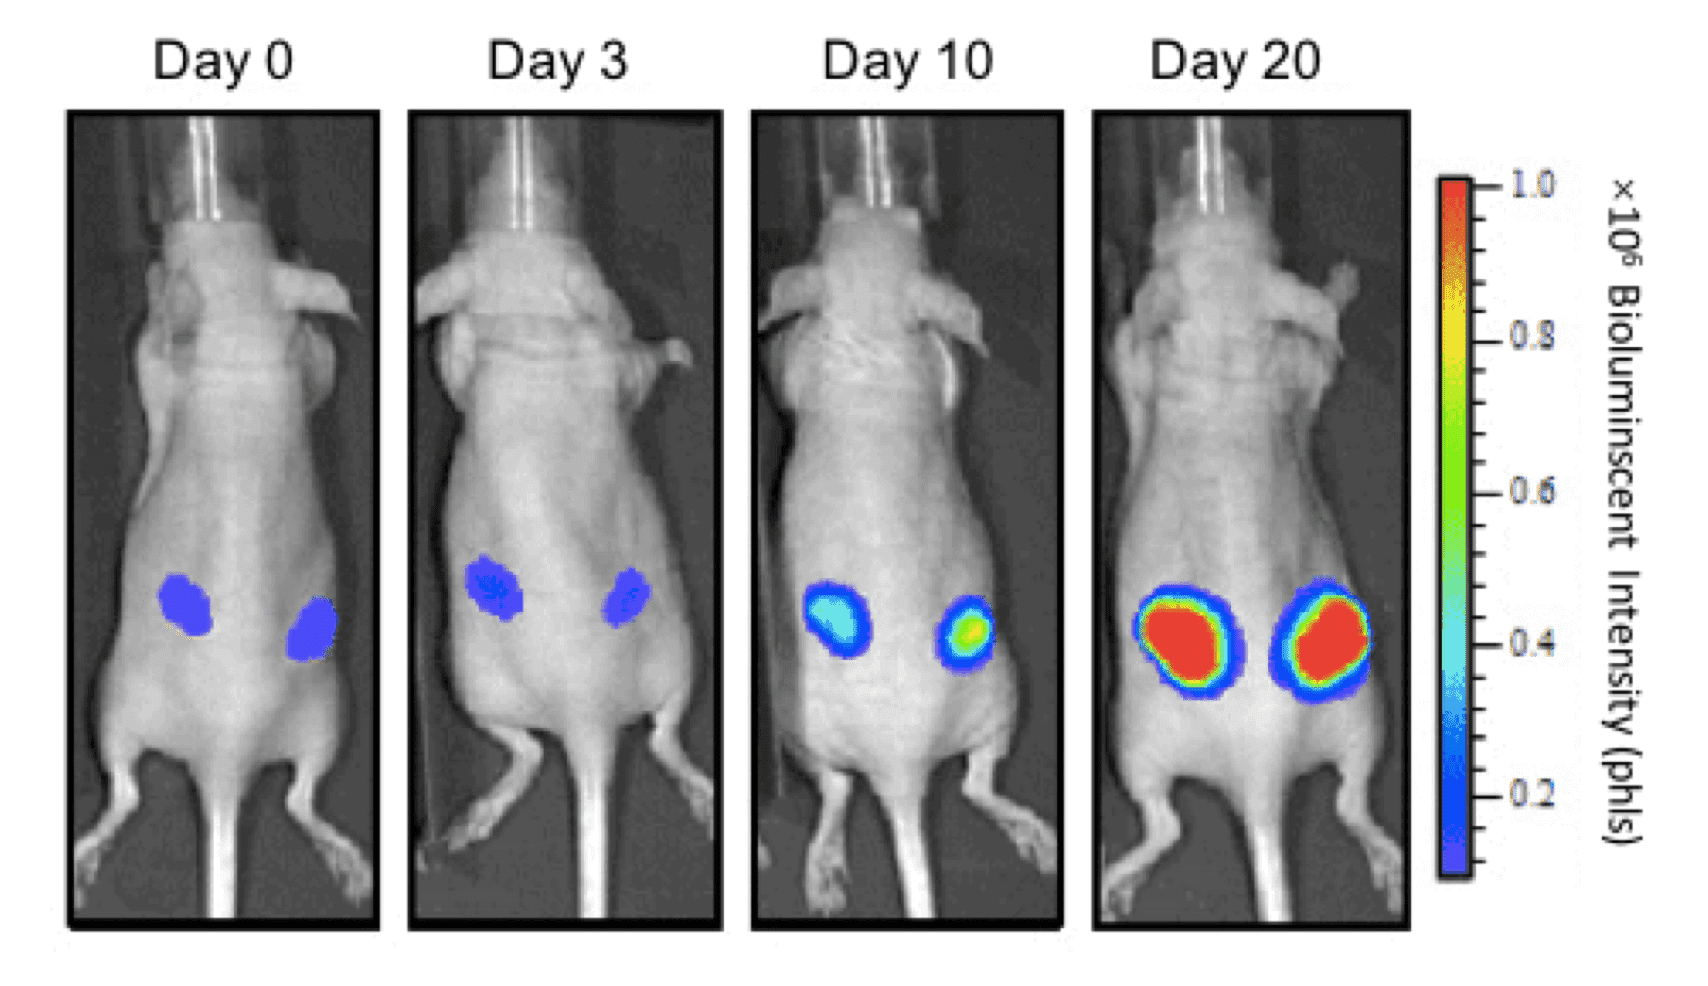 Orthotopic implantation of HT-29 colorectal  tumor cells and bioluminescent imaging of mice model over time (J Mol Biol & Mol Imaging, 2015).